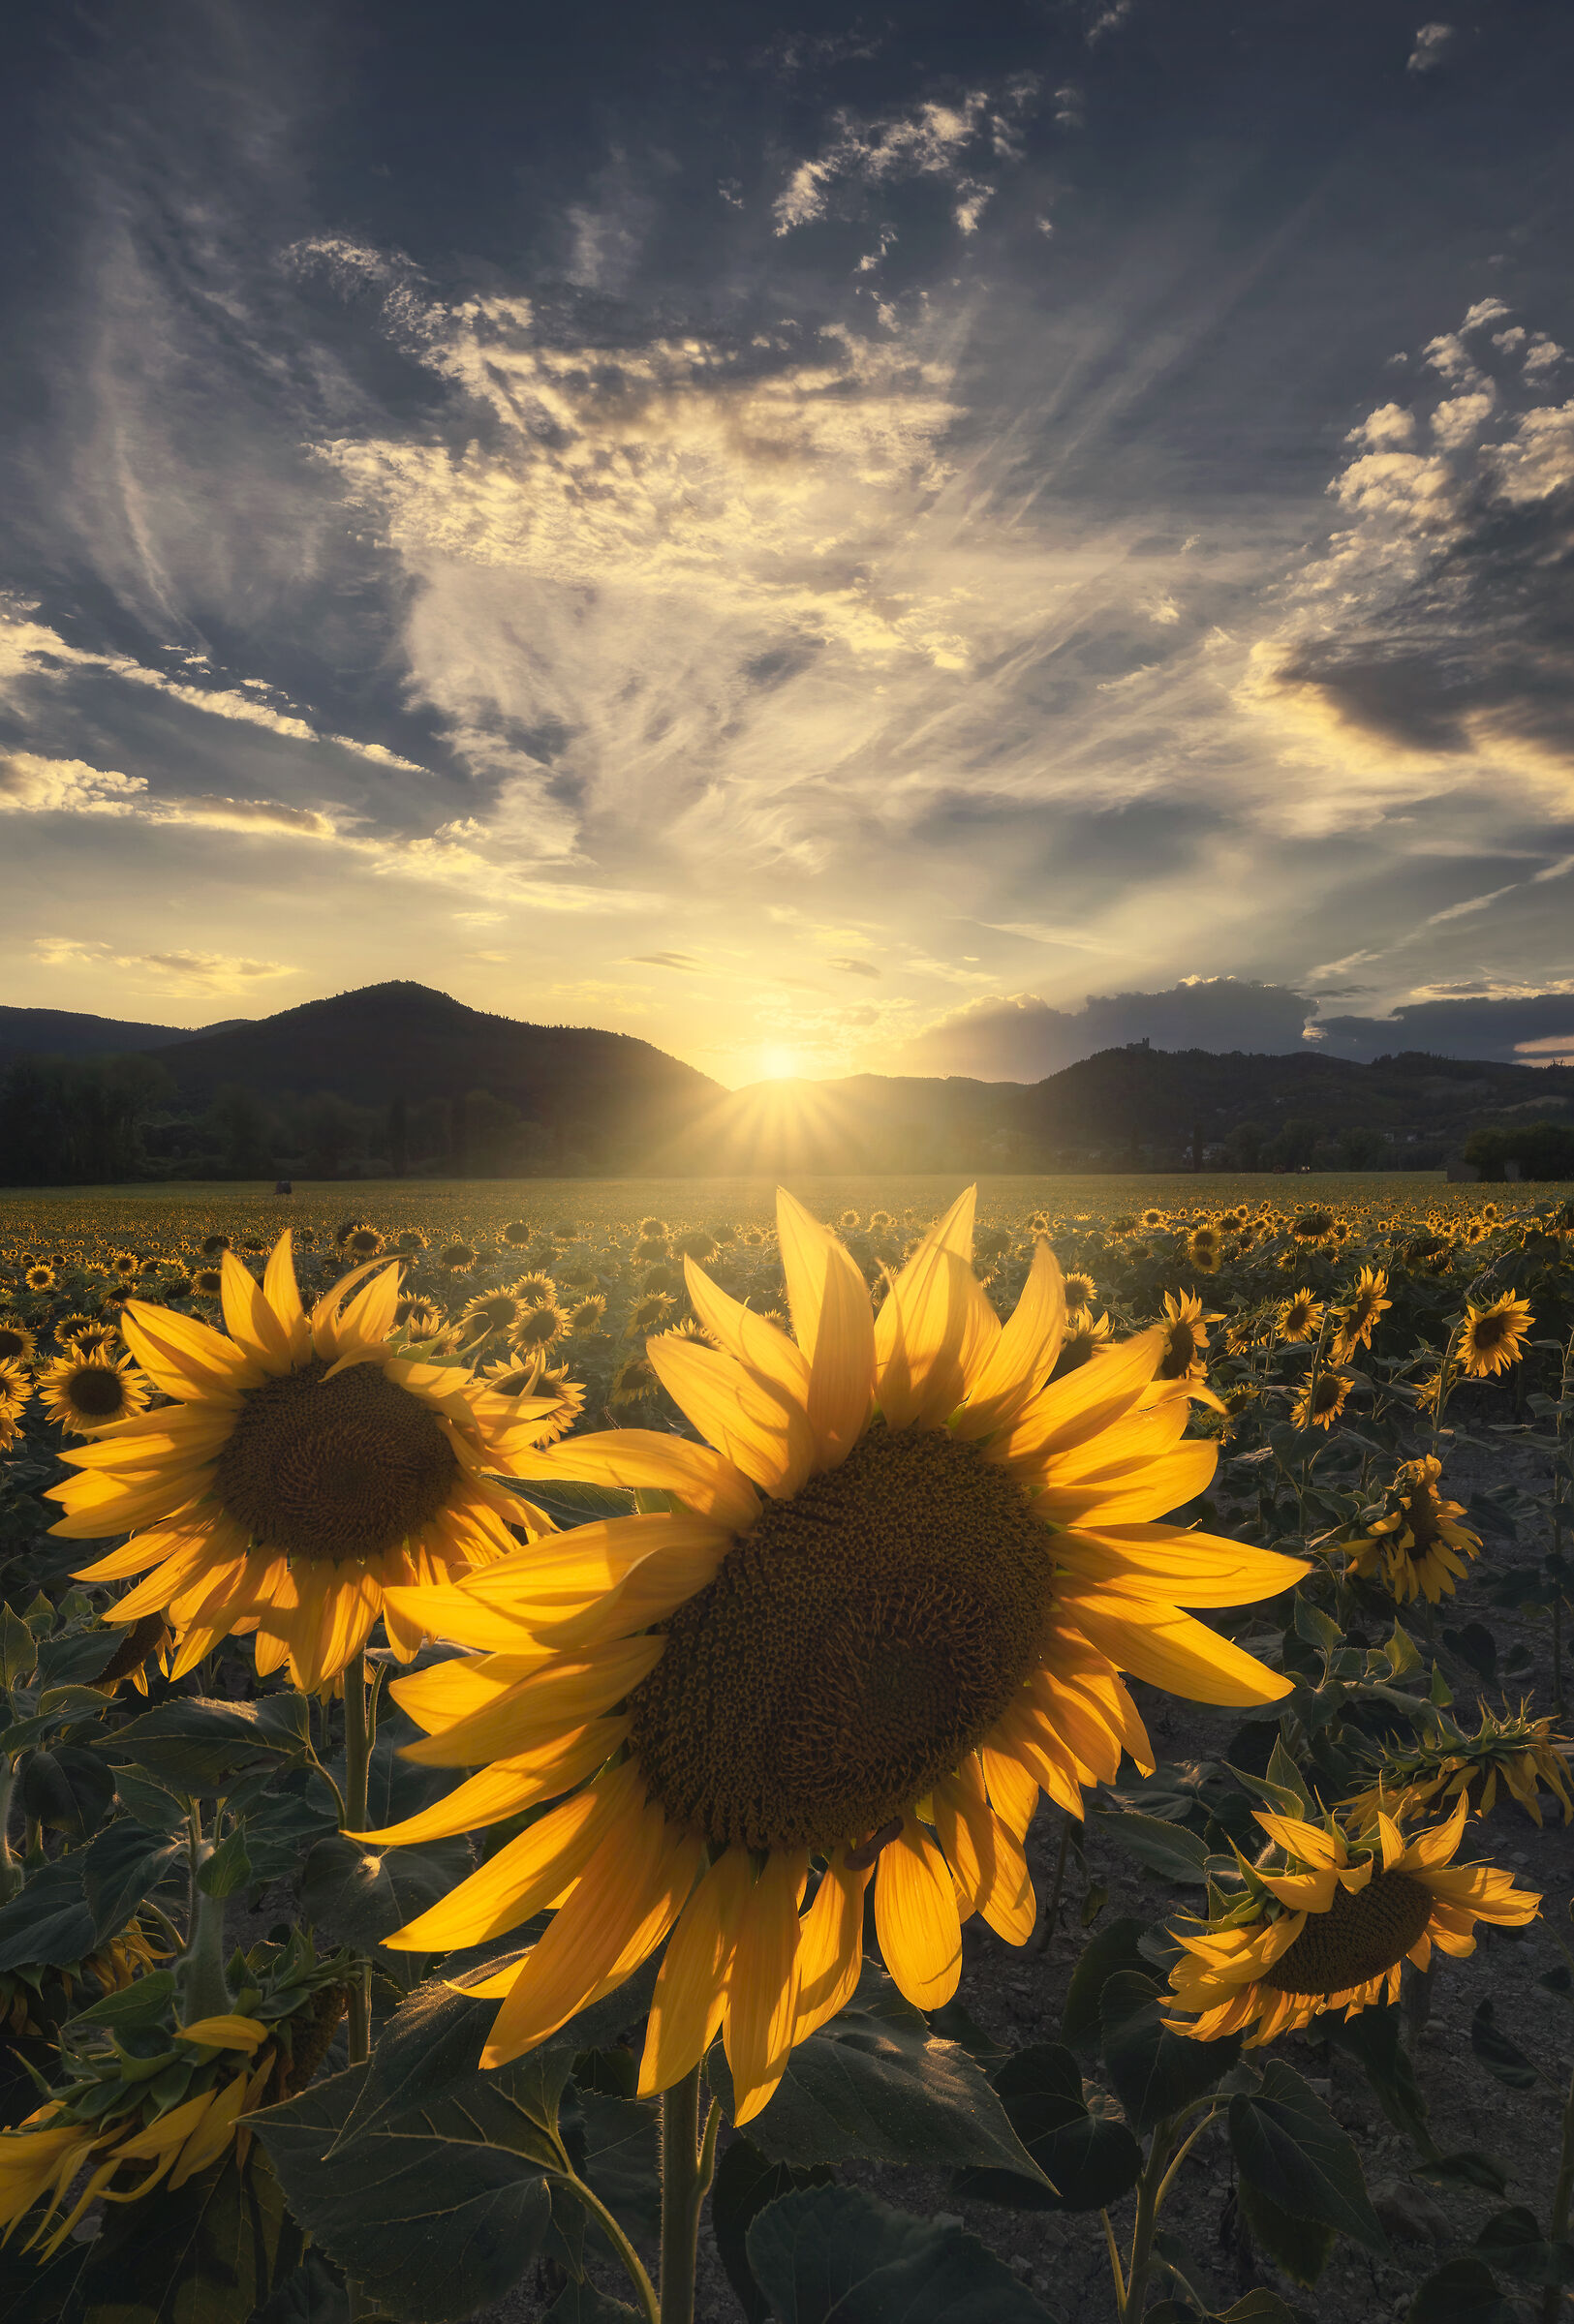 Between sunflowers and sunset...